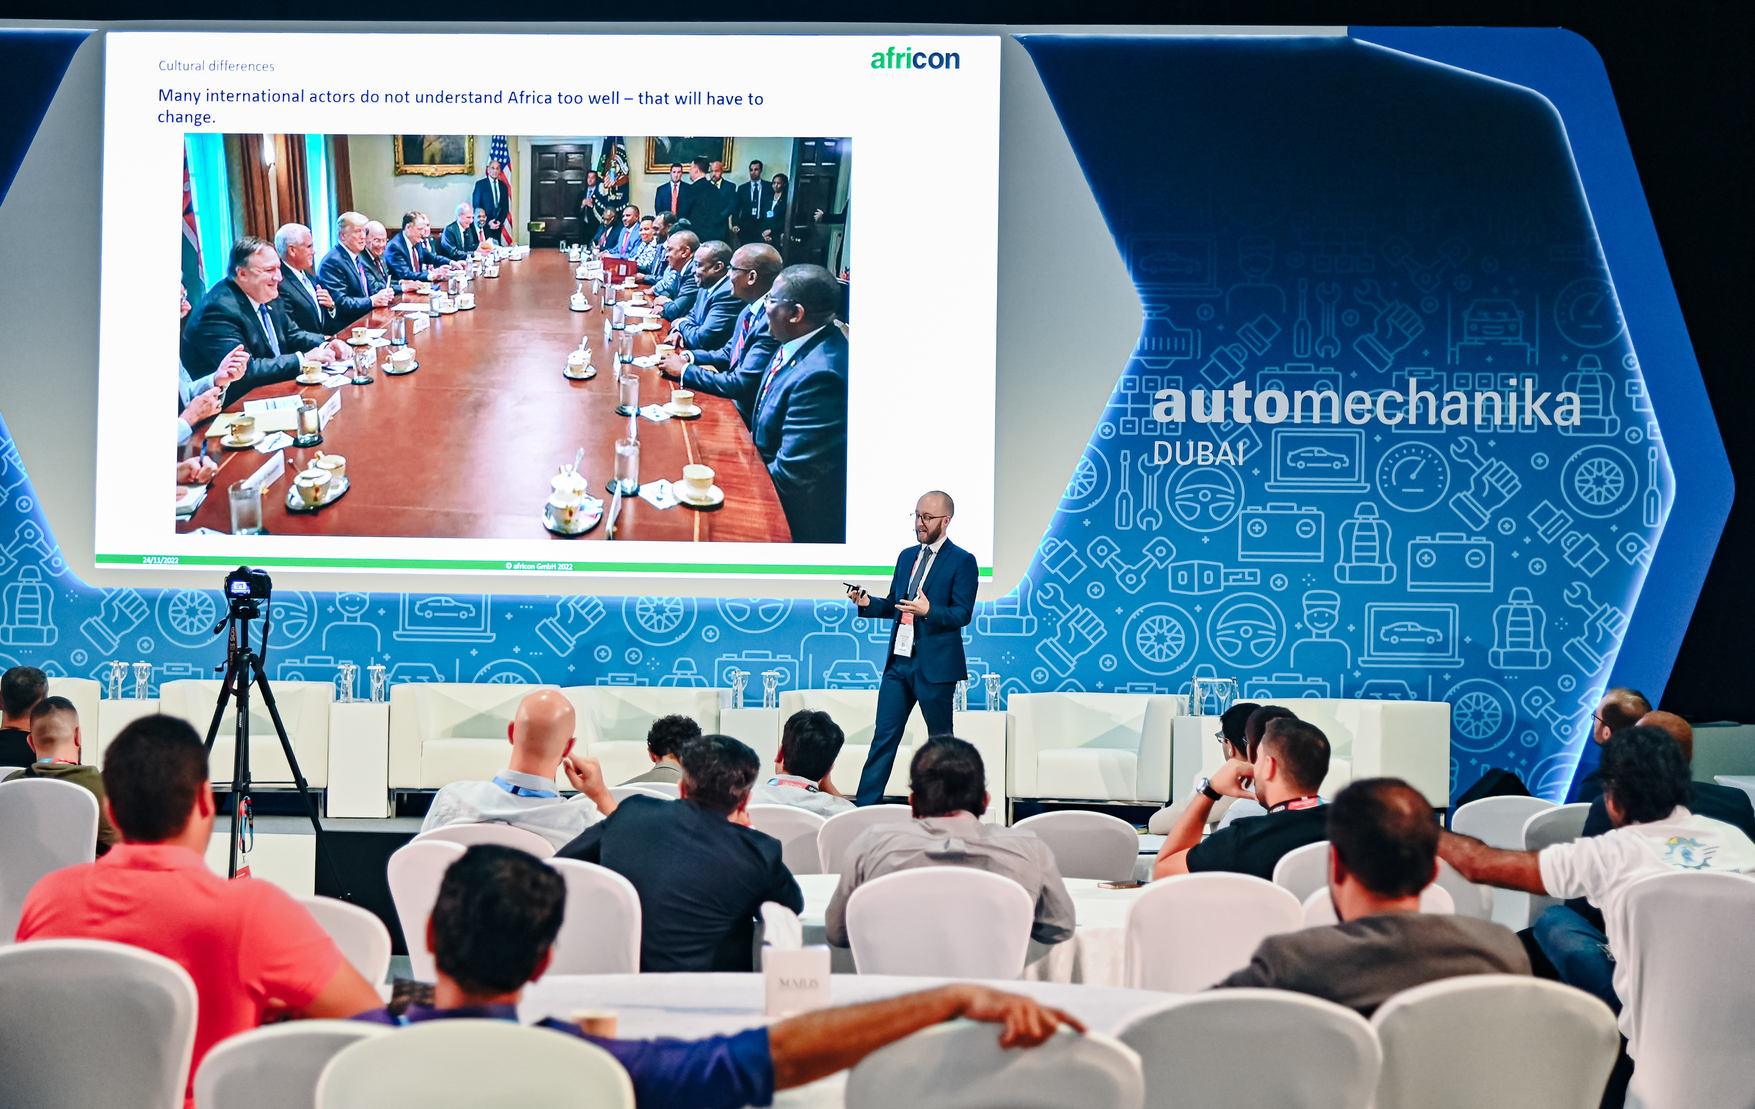 AfriConnections in Focus as 19th Edition of Automechanika Dubai Concludes